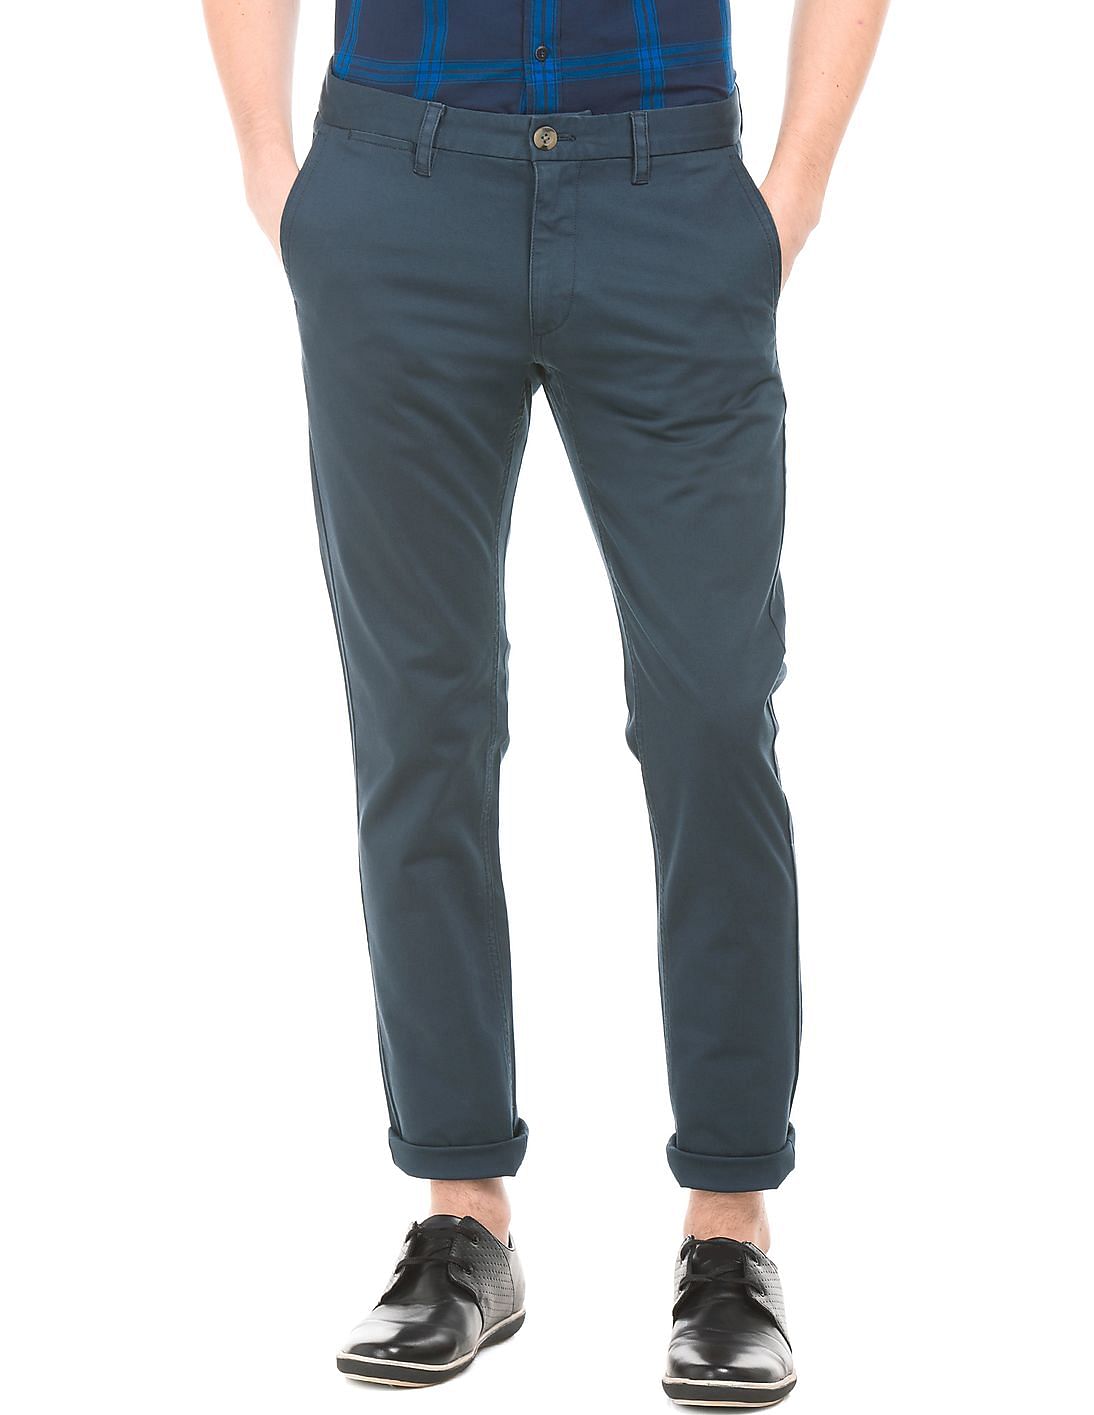 Buy U.S. Polo Assn. Textured Slim Fit Trousers - NNNOW.com